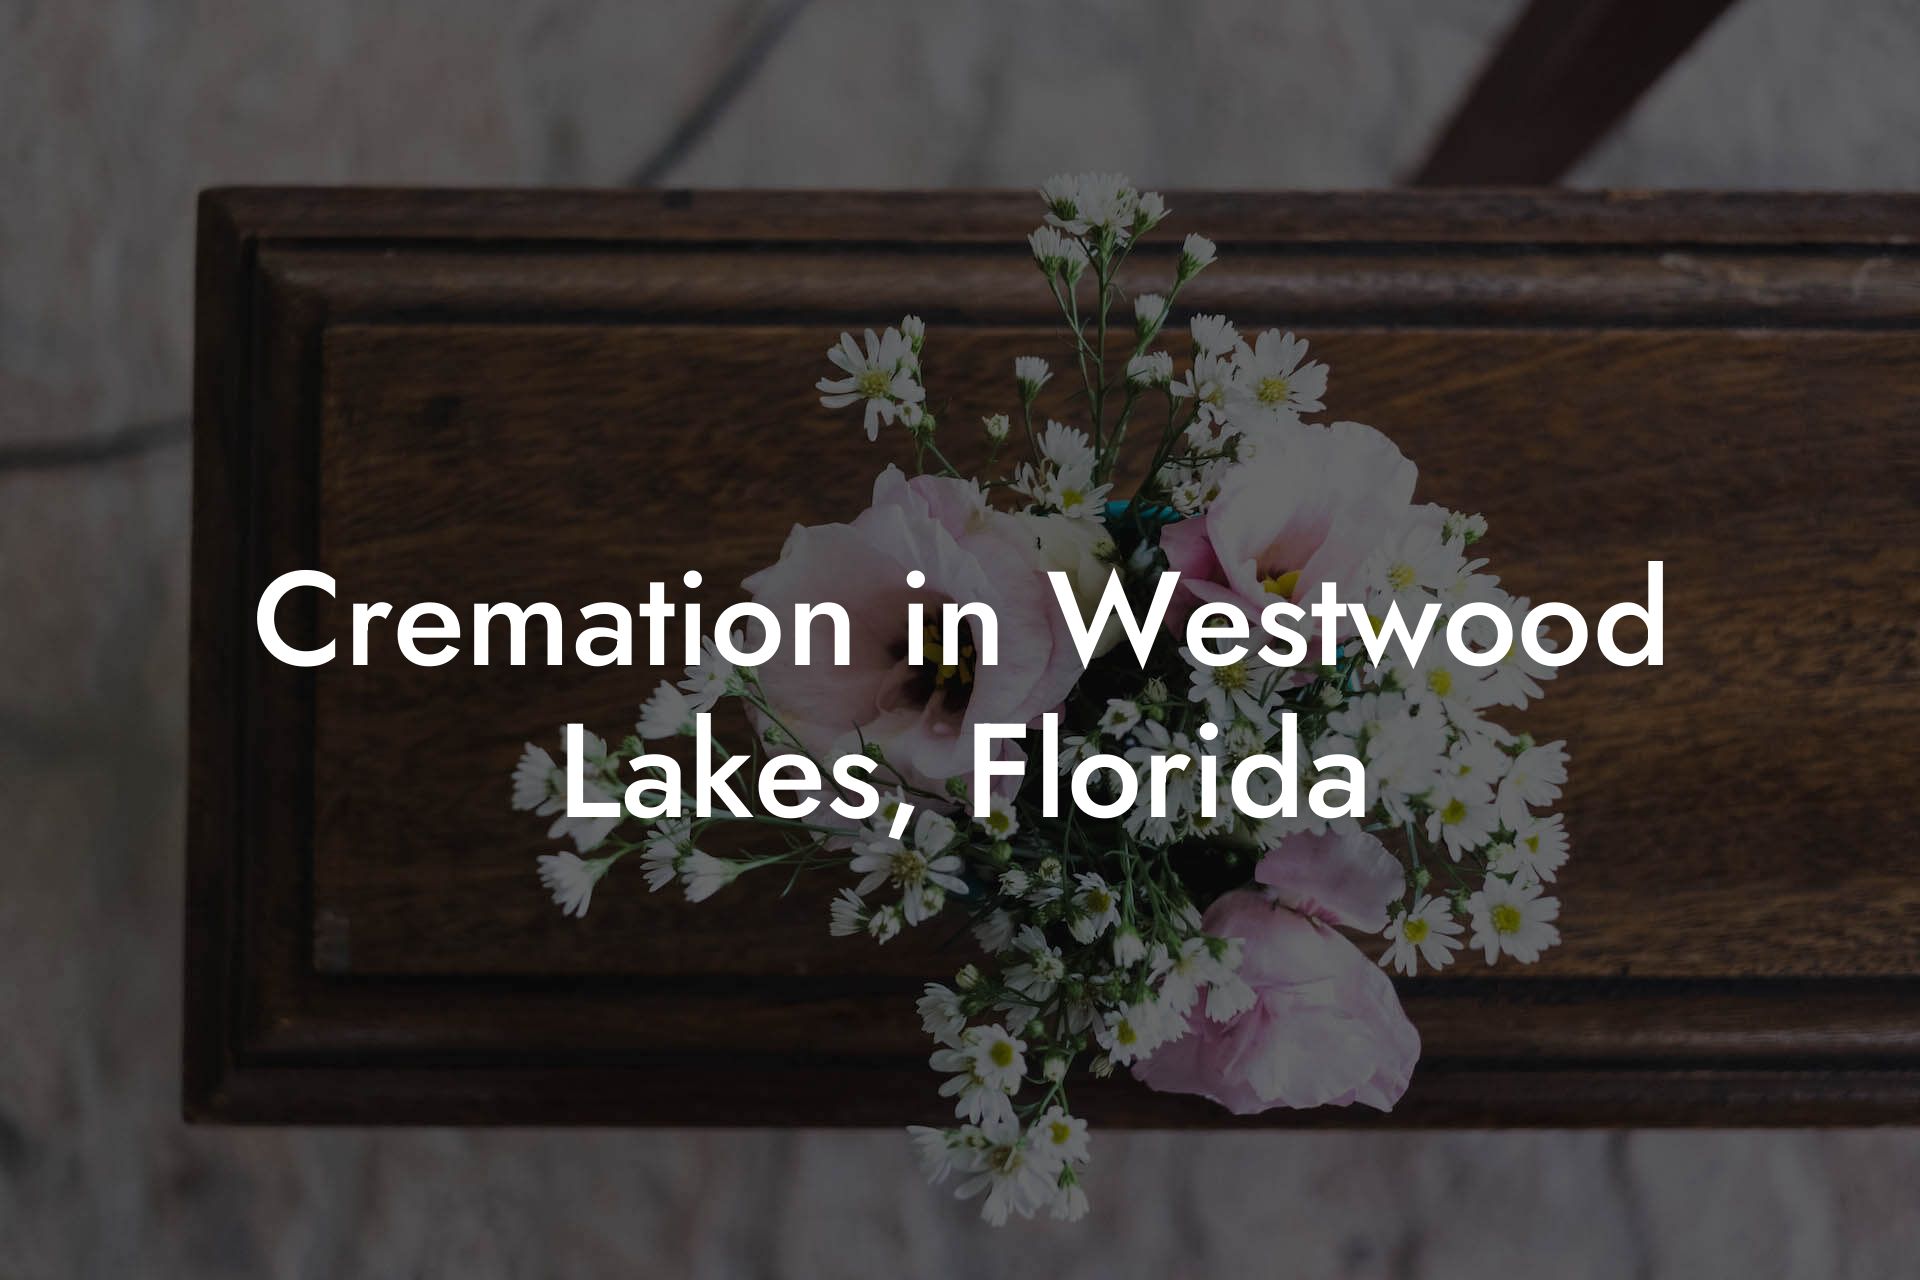 Cremation in Westwood Lakes, Florida